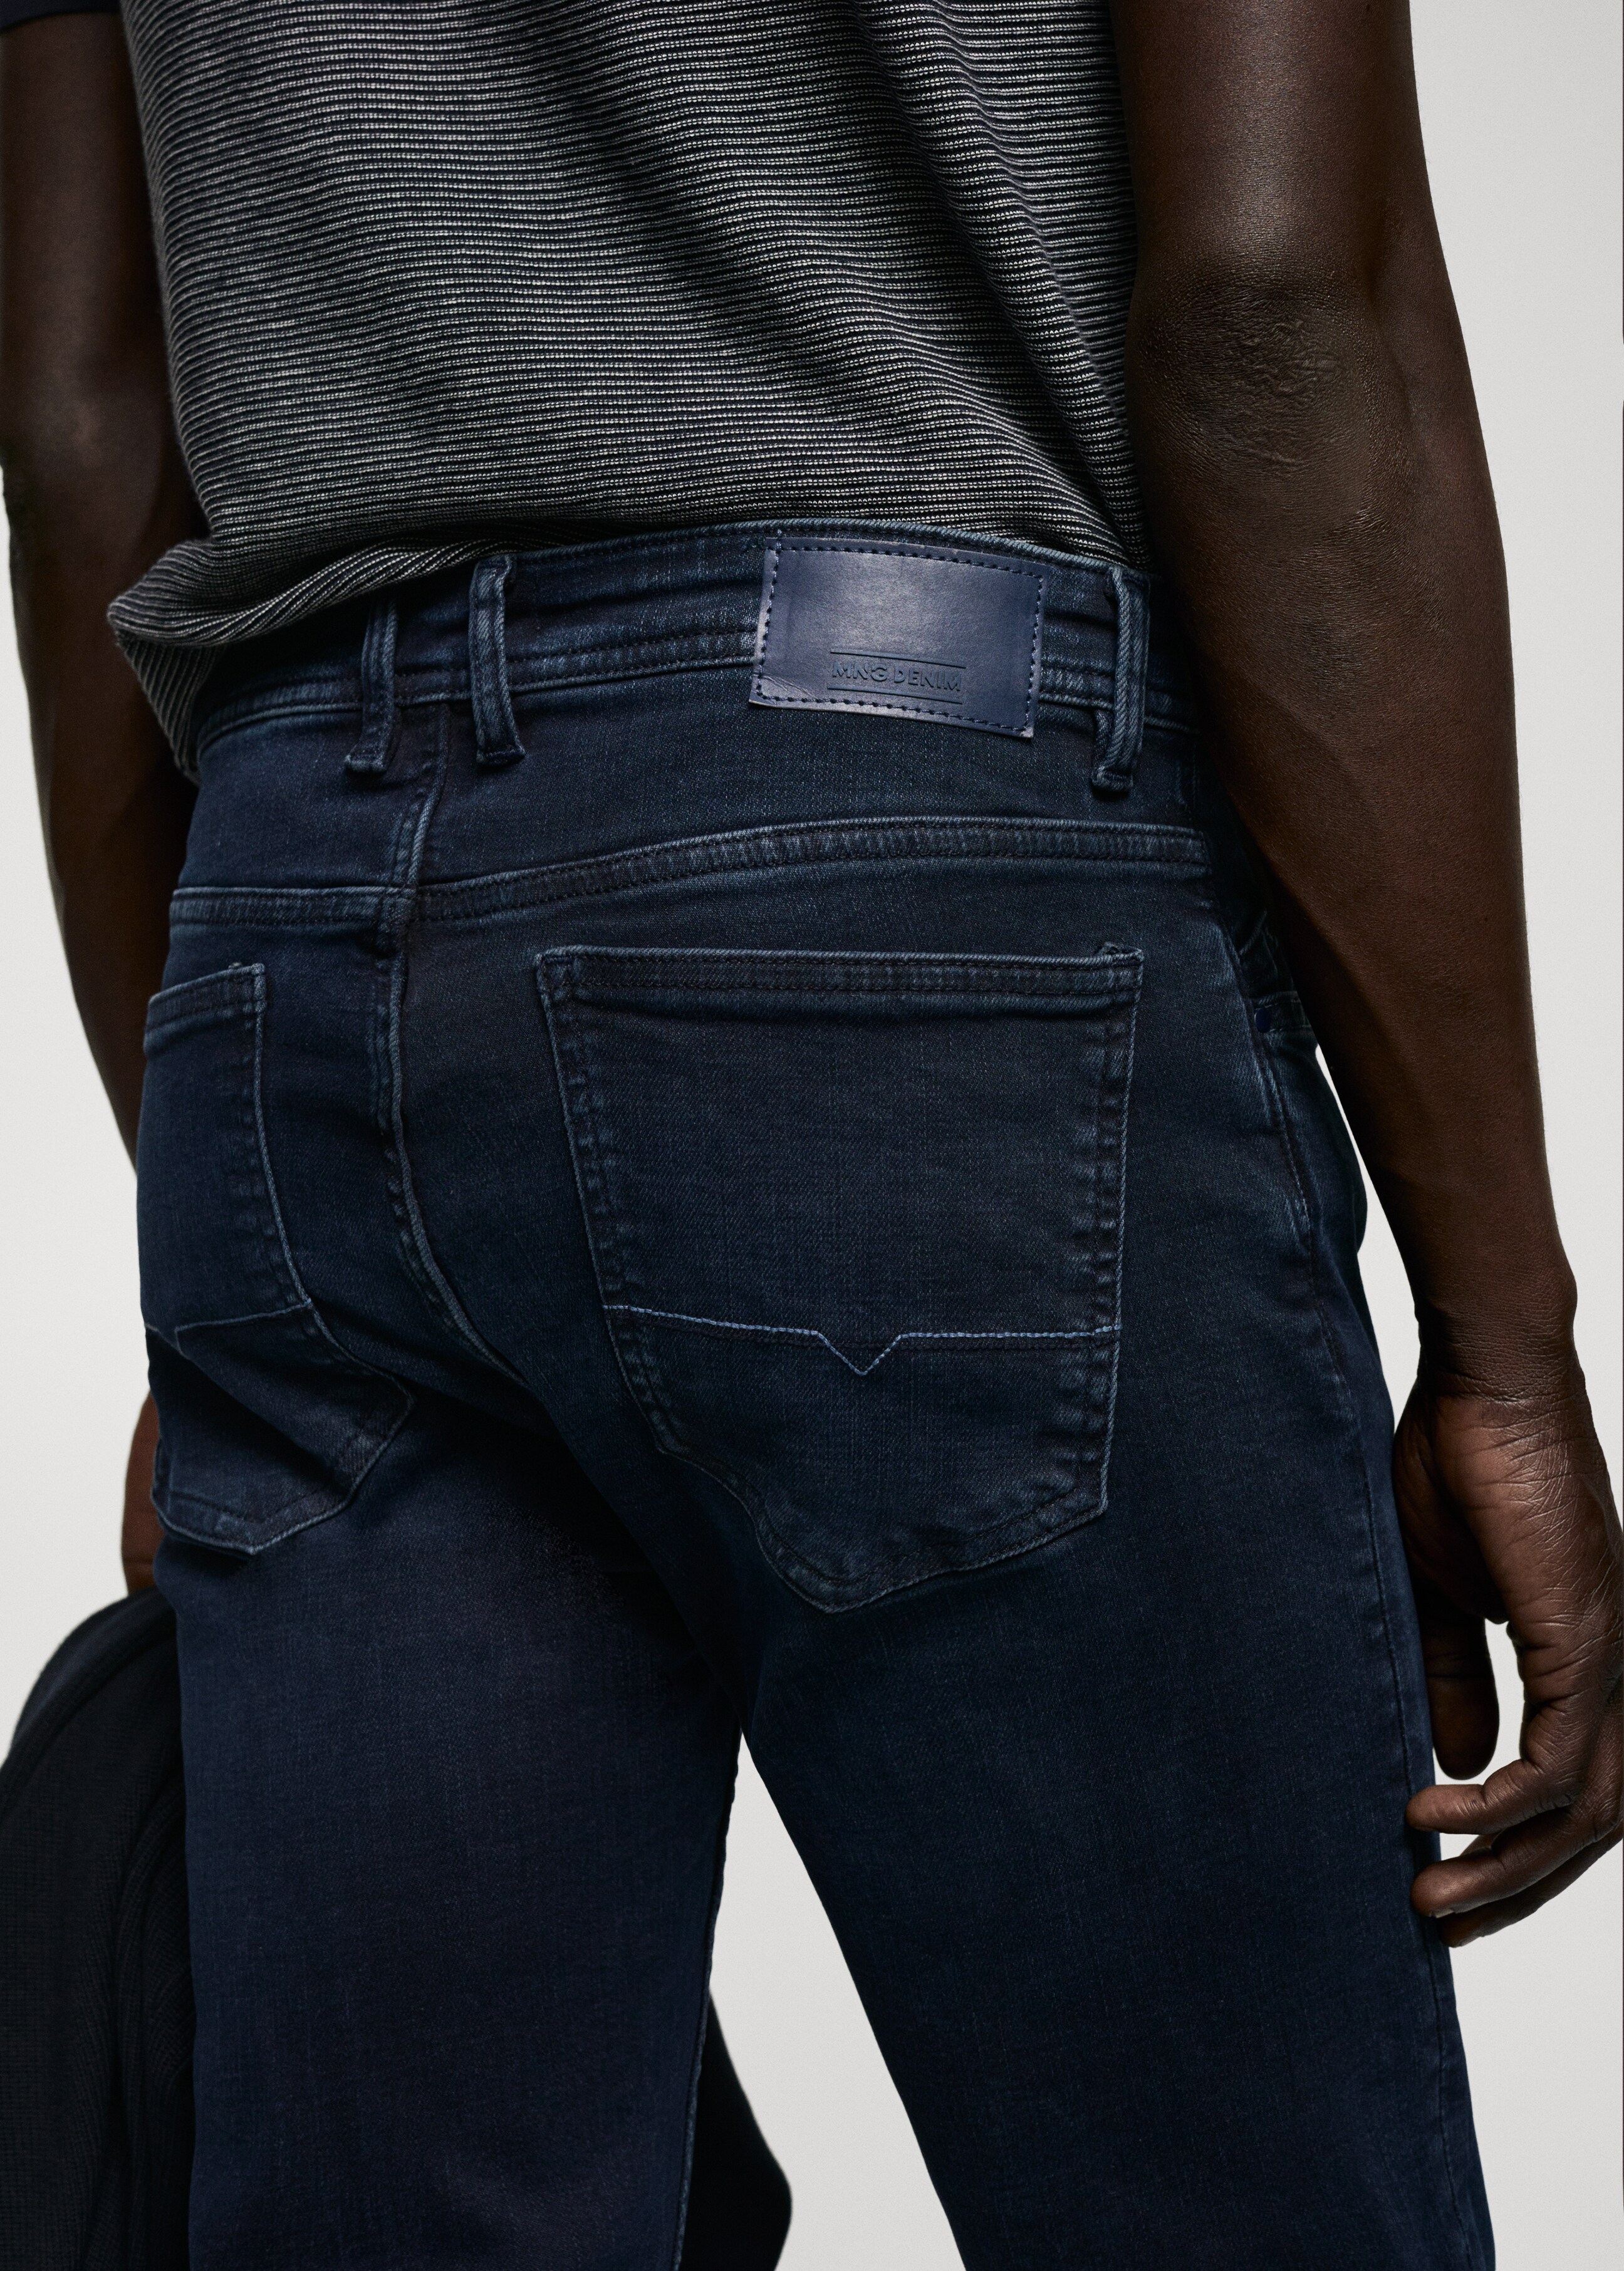 Premium skinny jeans - Details of the article 6